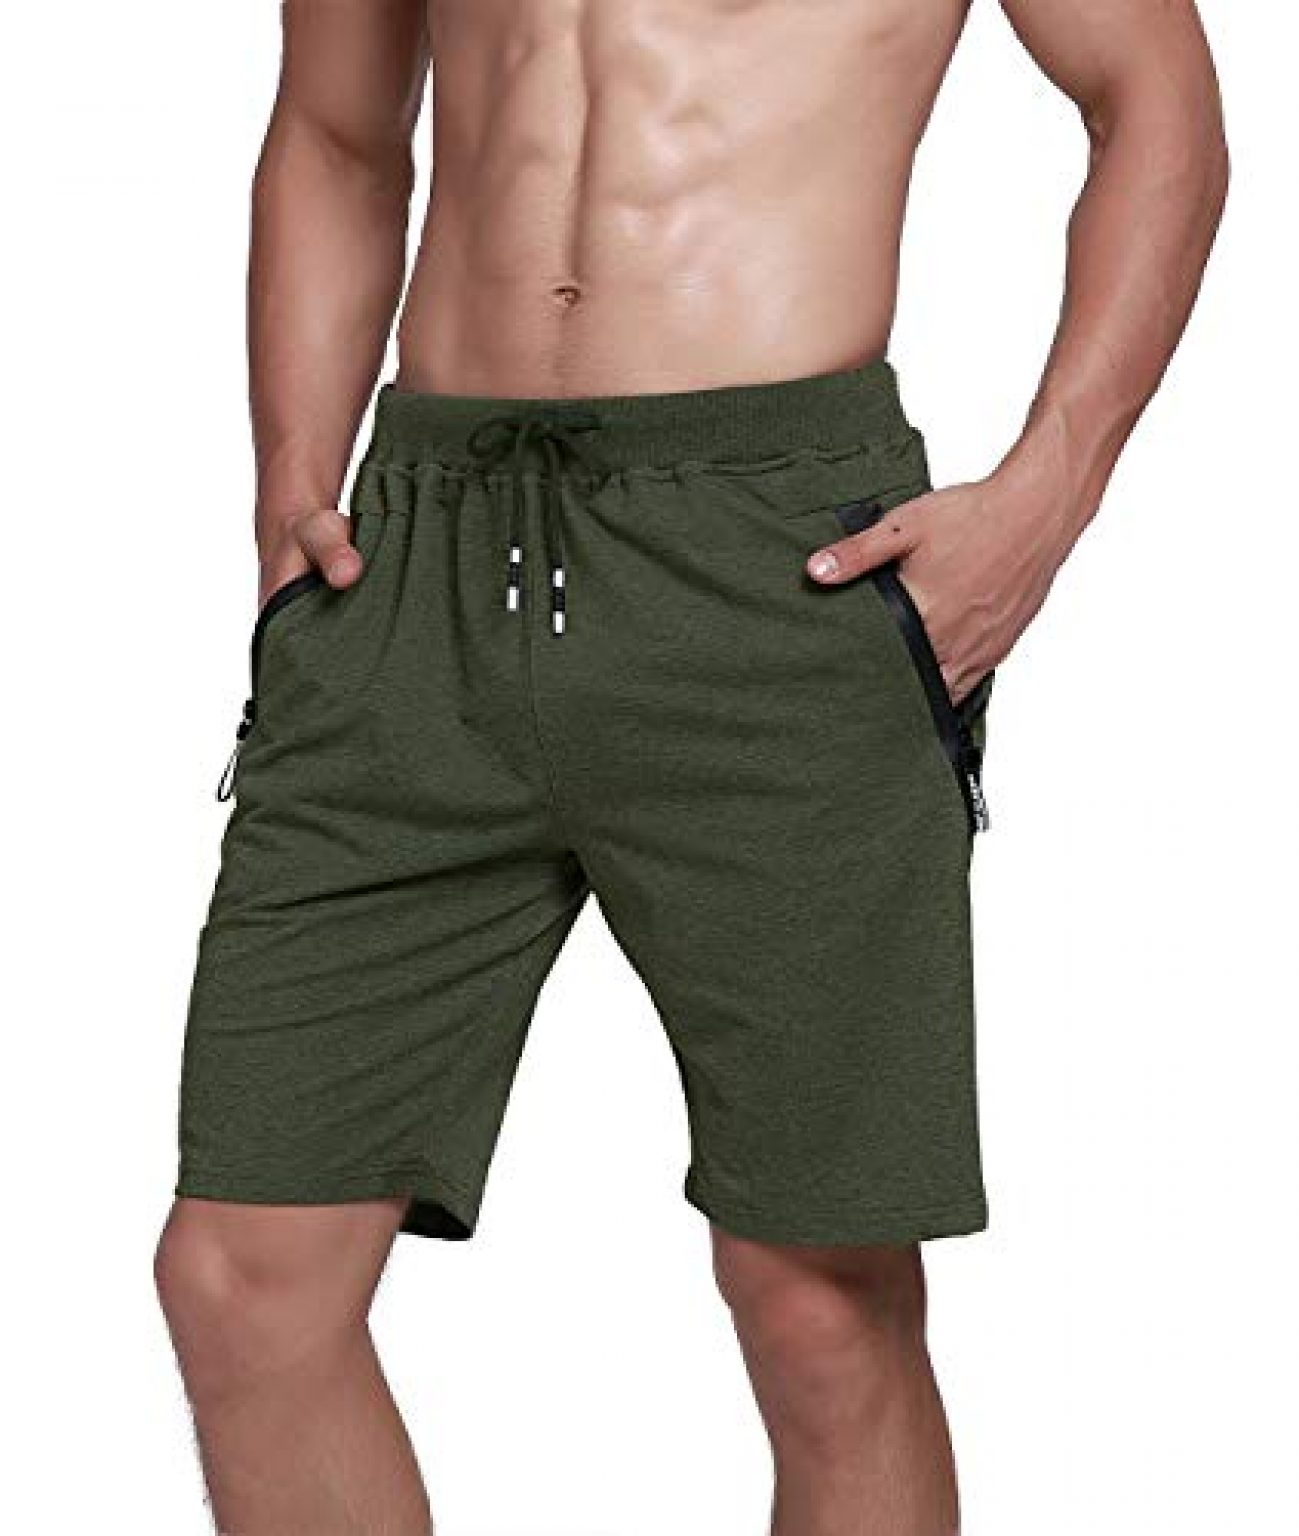 donhobo Mens Cotton Gym Shorts Breathable Wicking Casual Sports Joggers ...